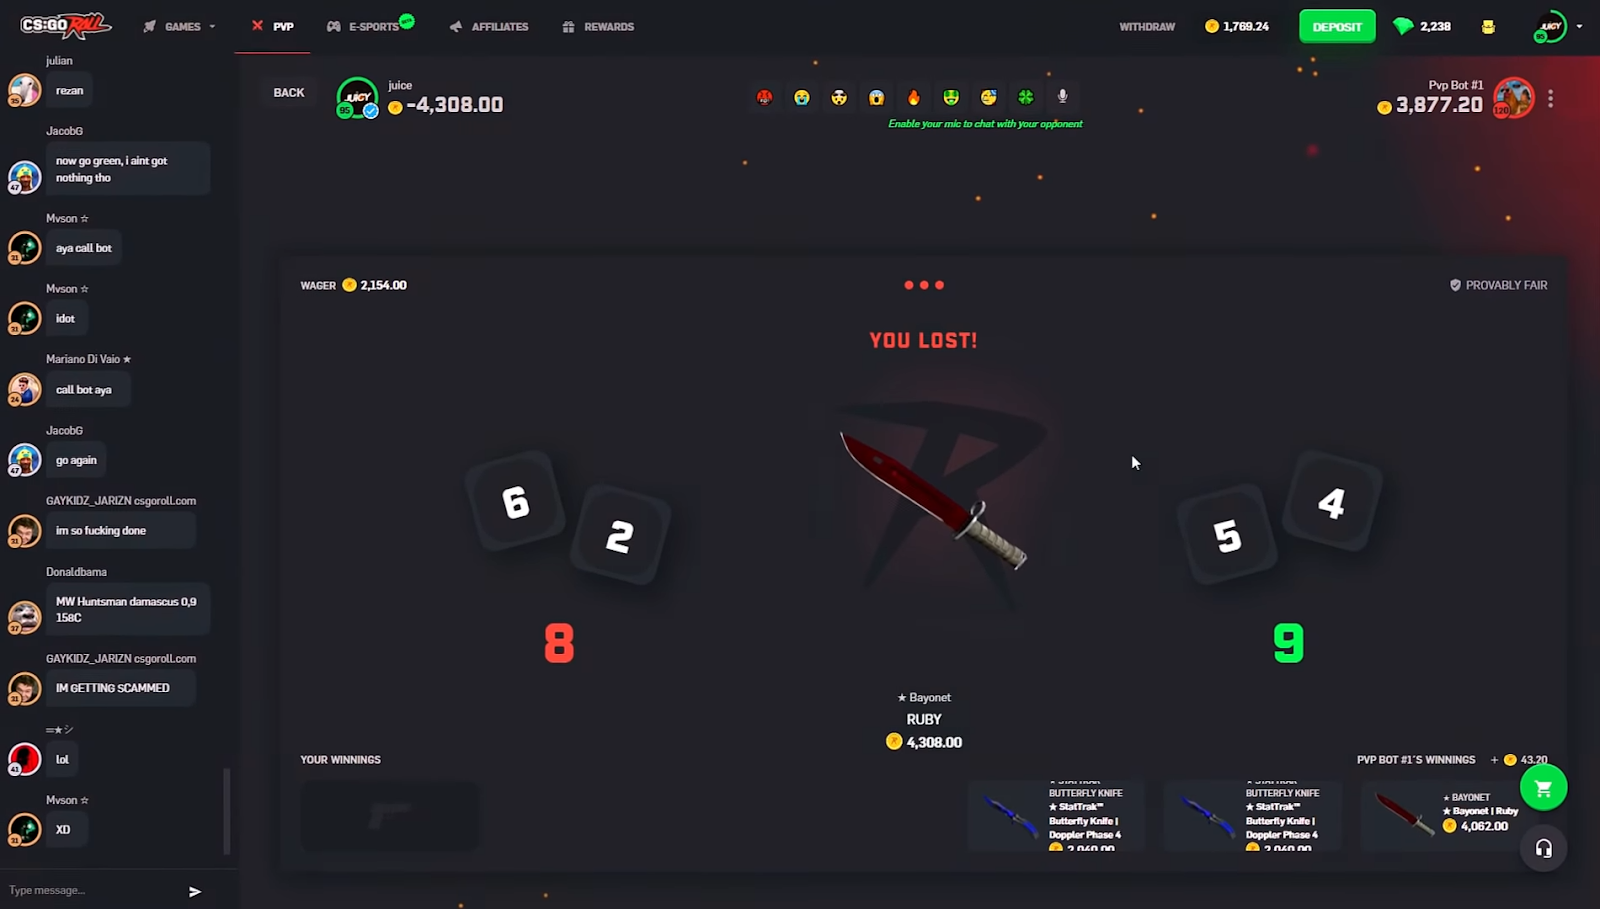 How to Gamble on CSGO Gambling Sites in 2023?